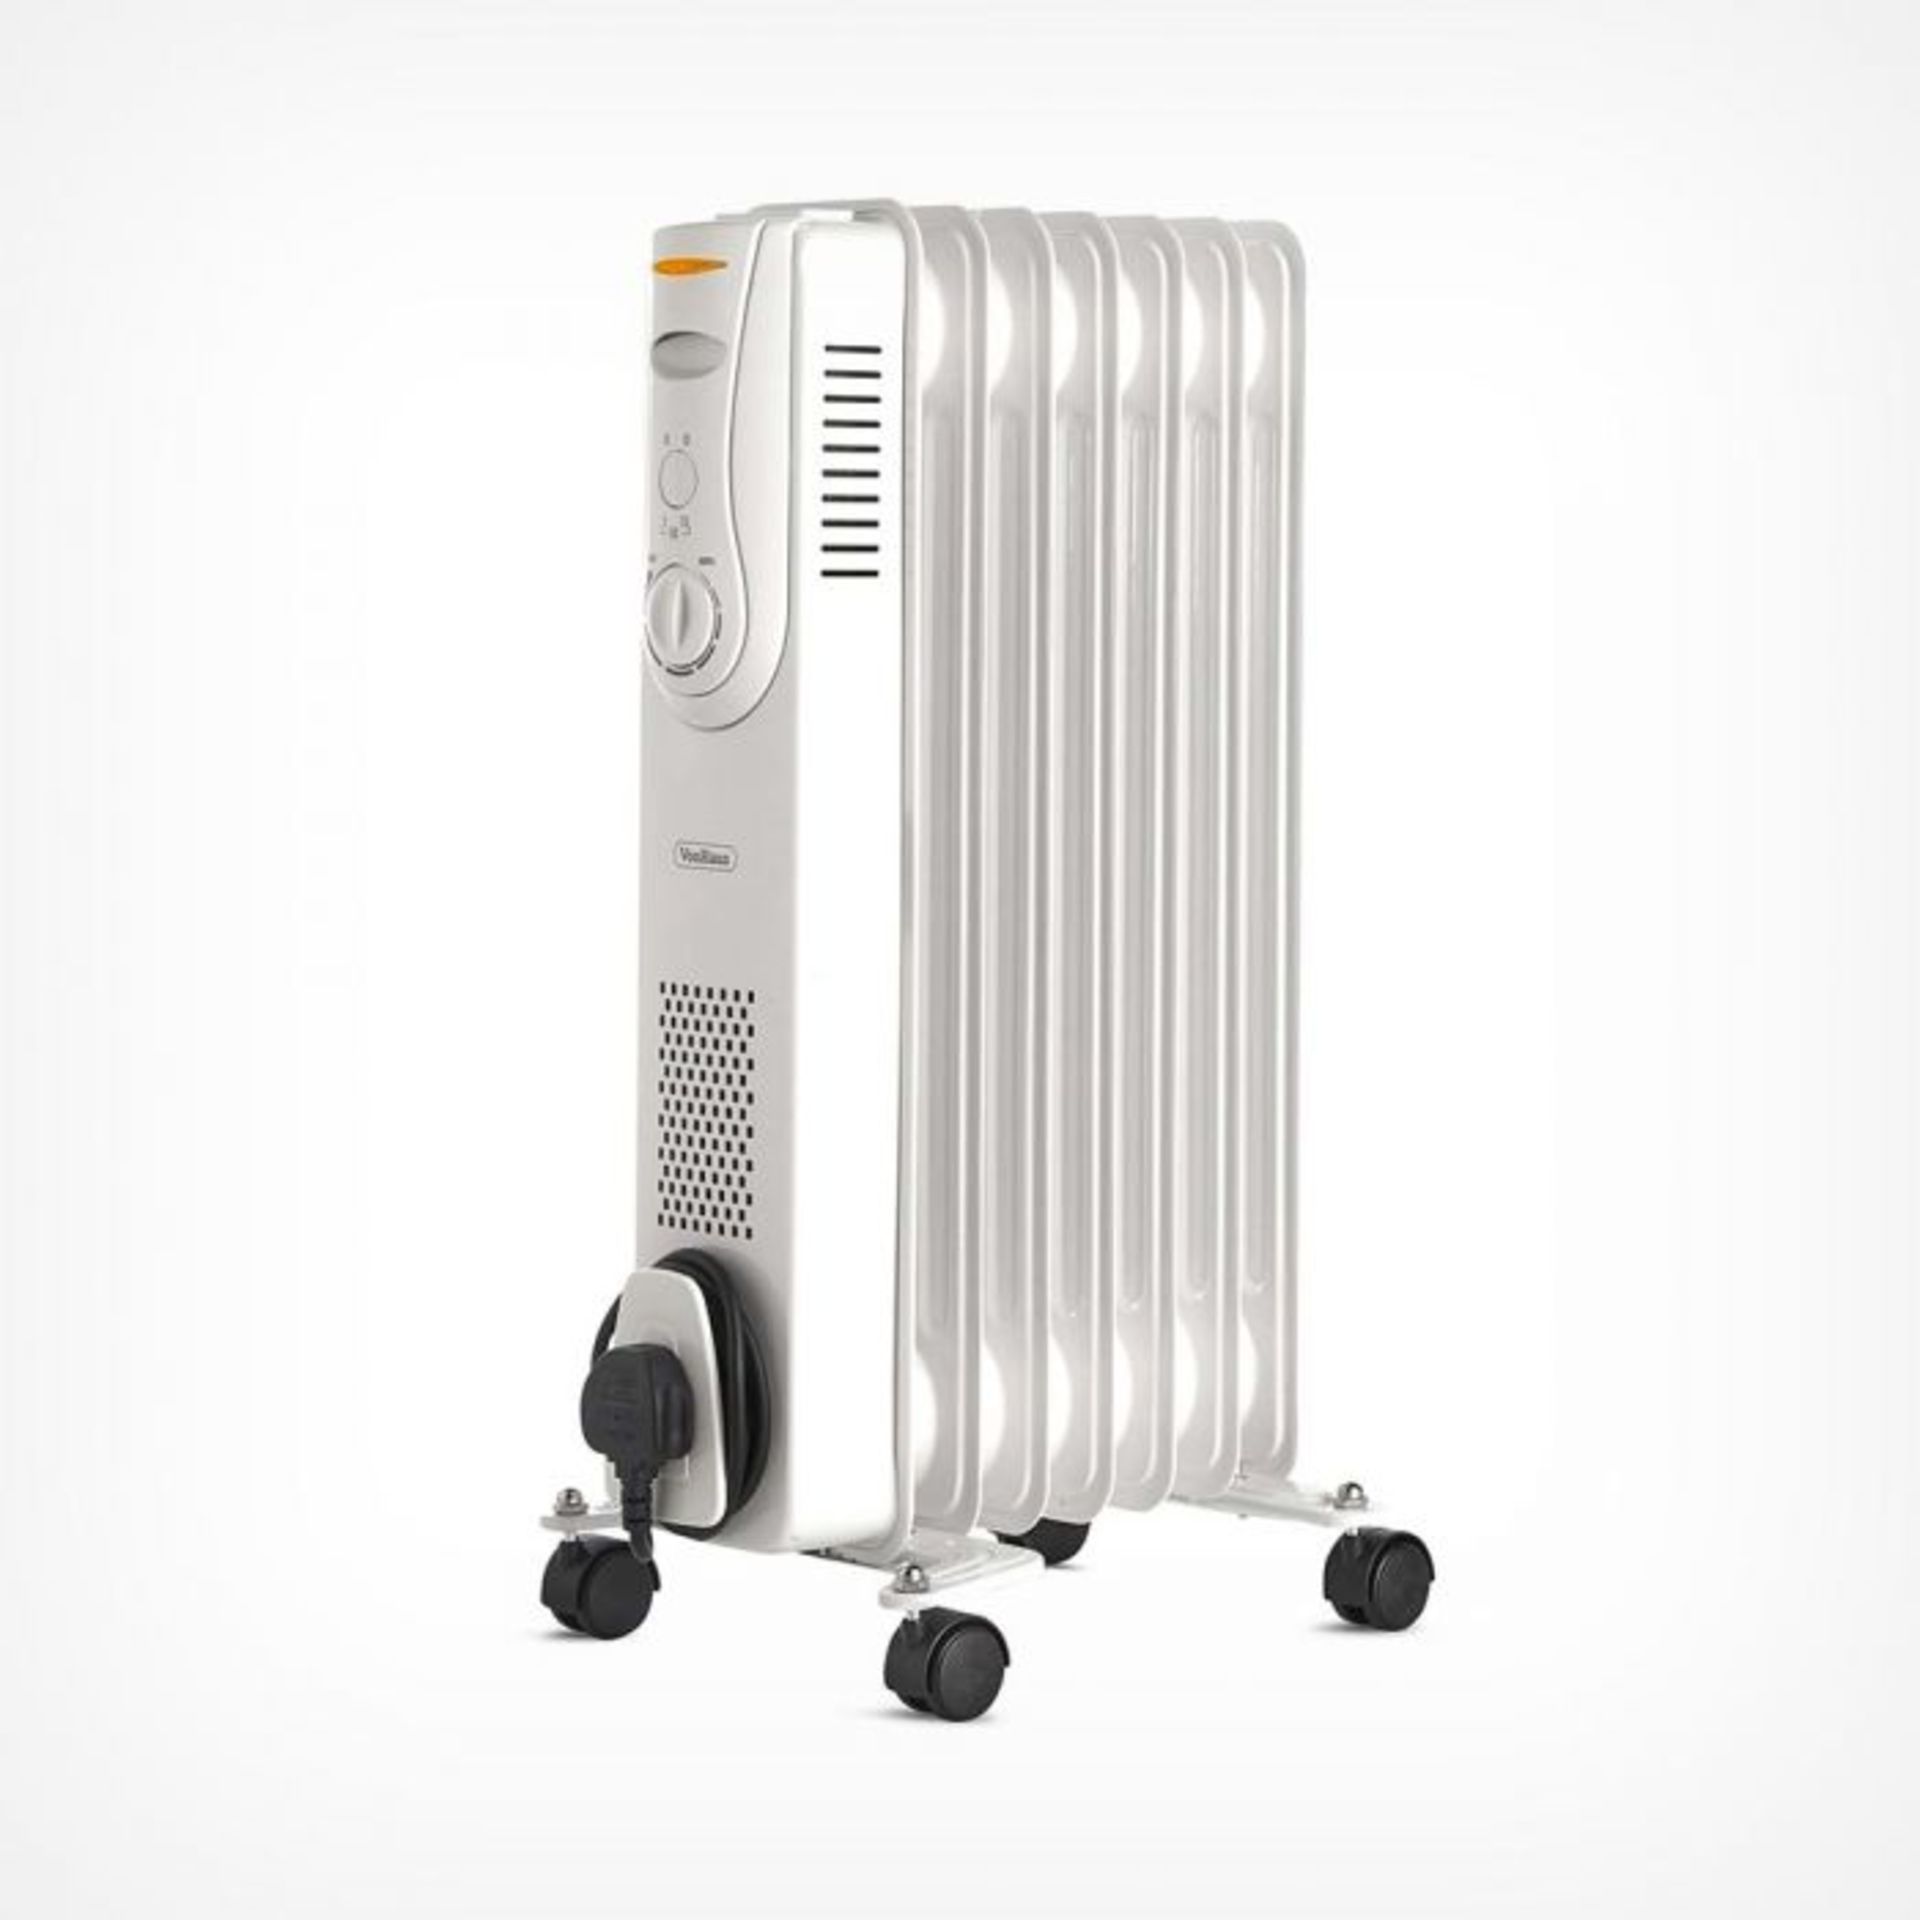 (V140) 7 Fin 1500W Oil Filled Radiator - White Powerful 1500W radiator with 7 oil-filled fins ... - Image 2 of 5